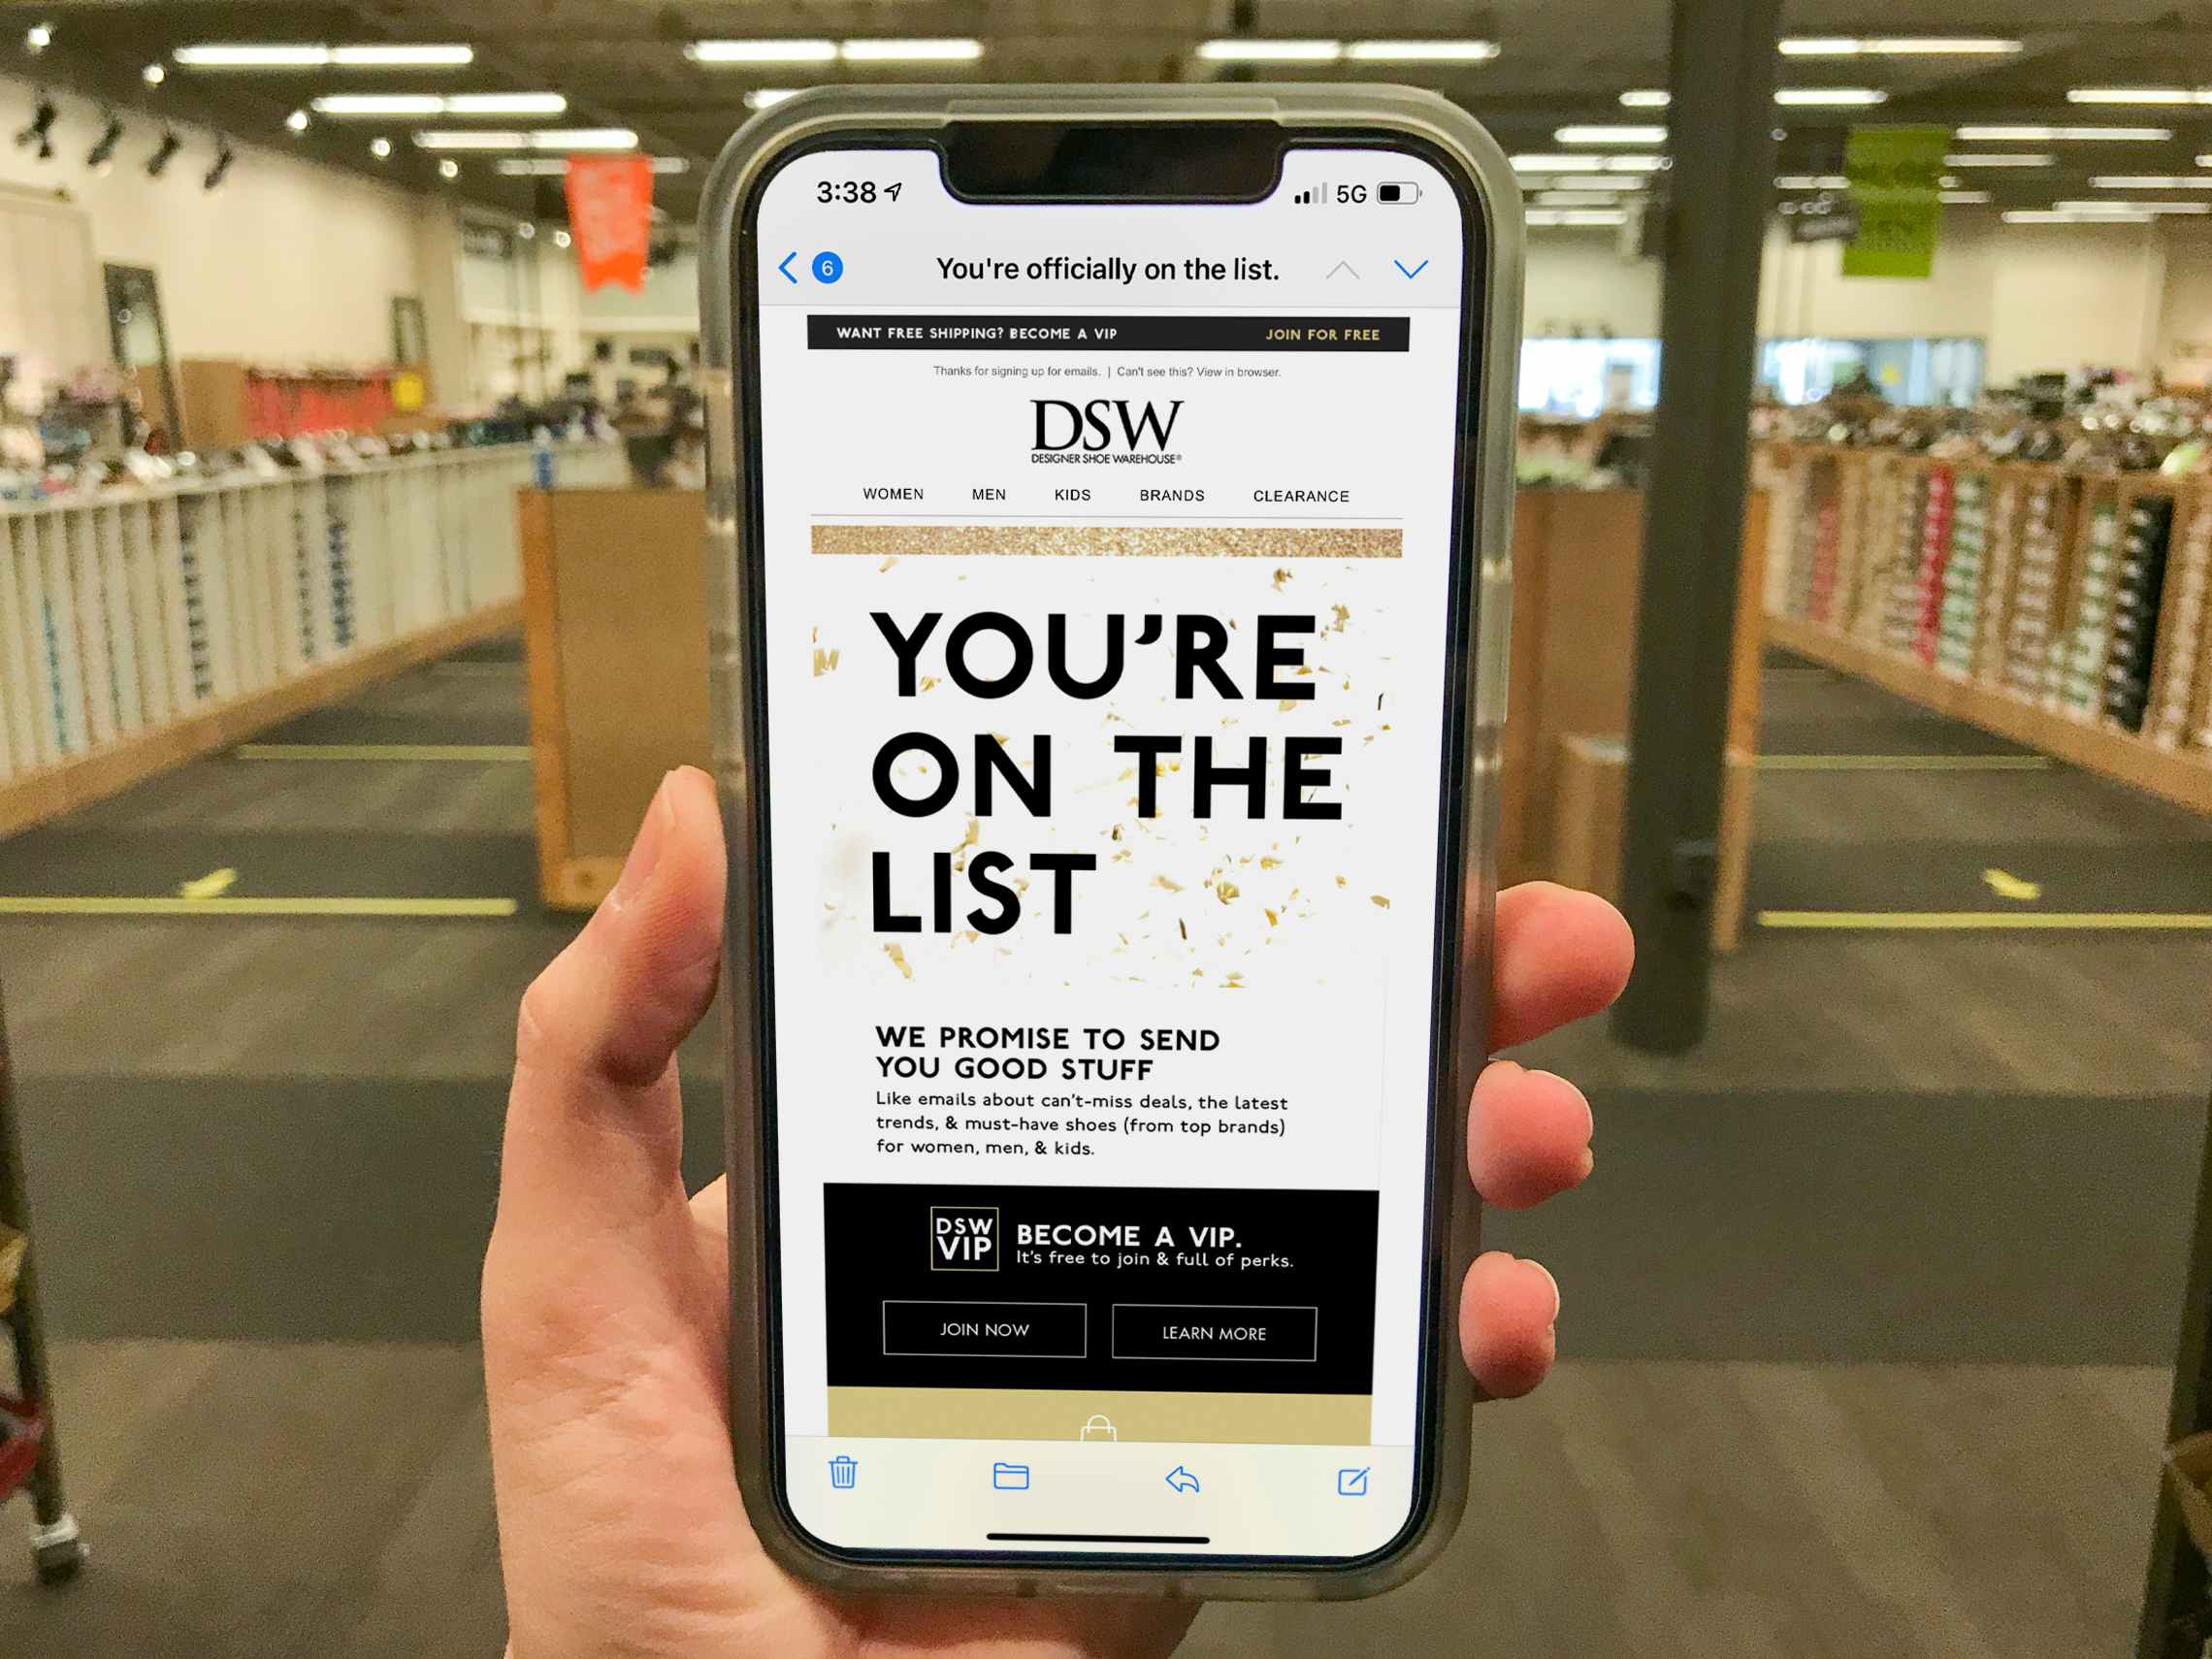 A sign up email on a cell phone that says "DSW. You're On the List".